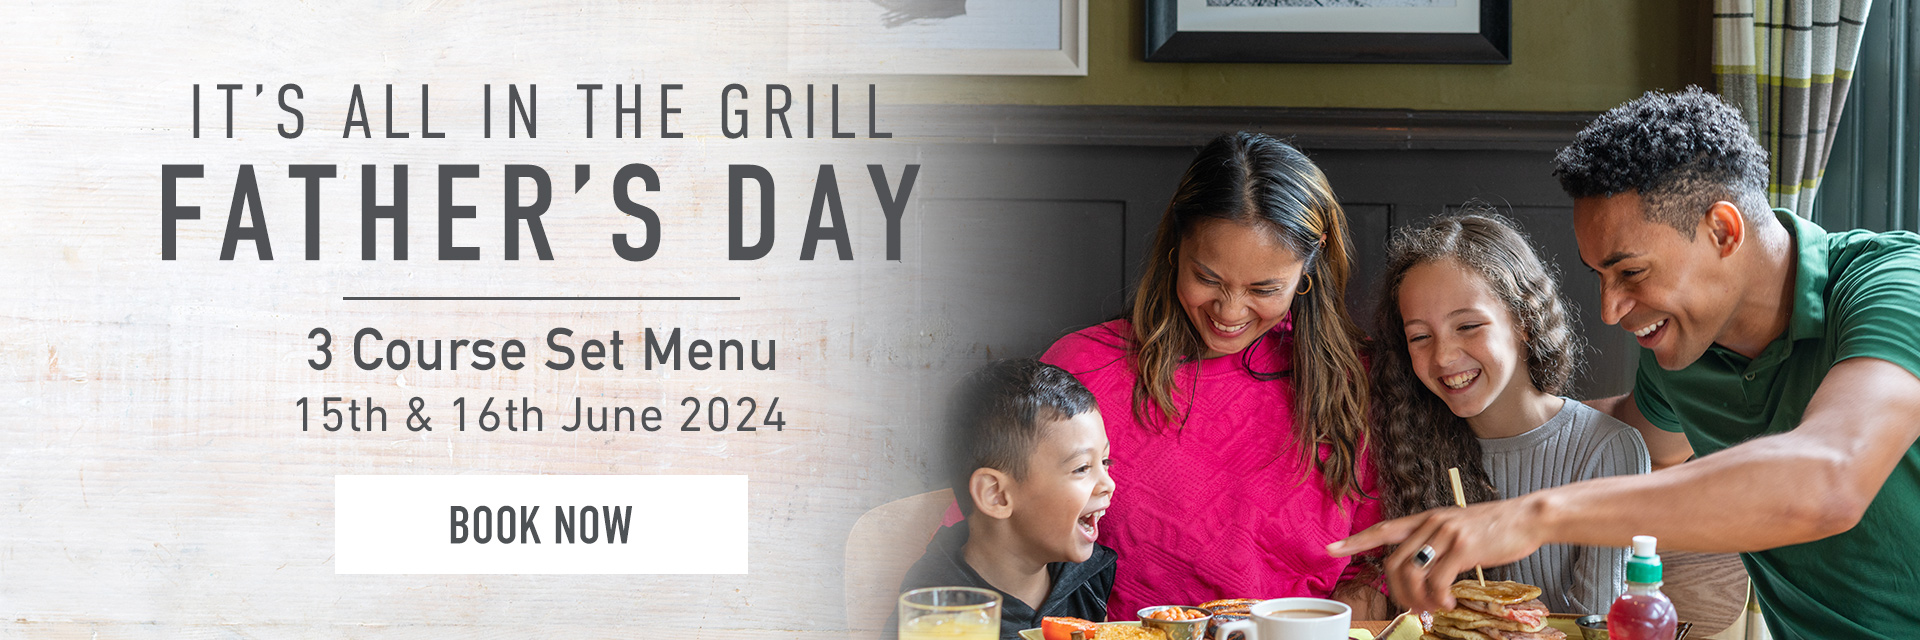 Father’s Day at Harvester Pride Park